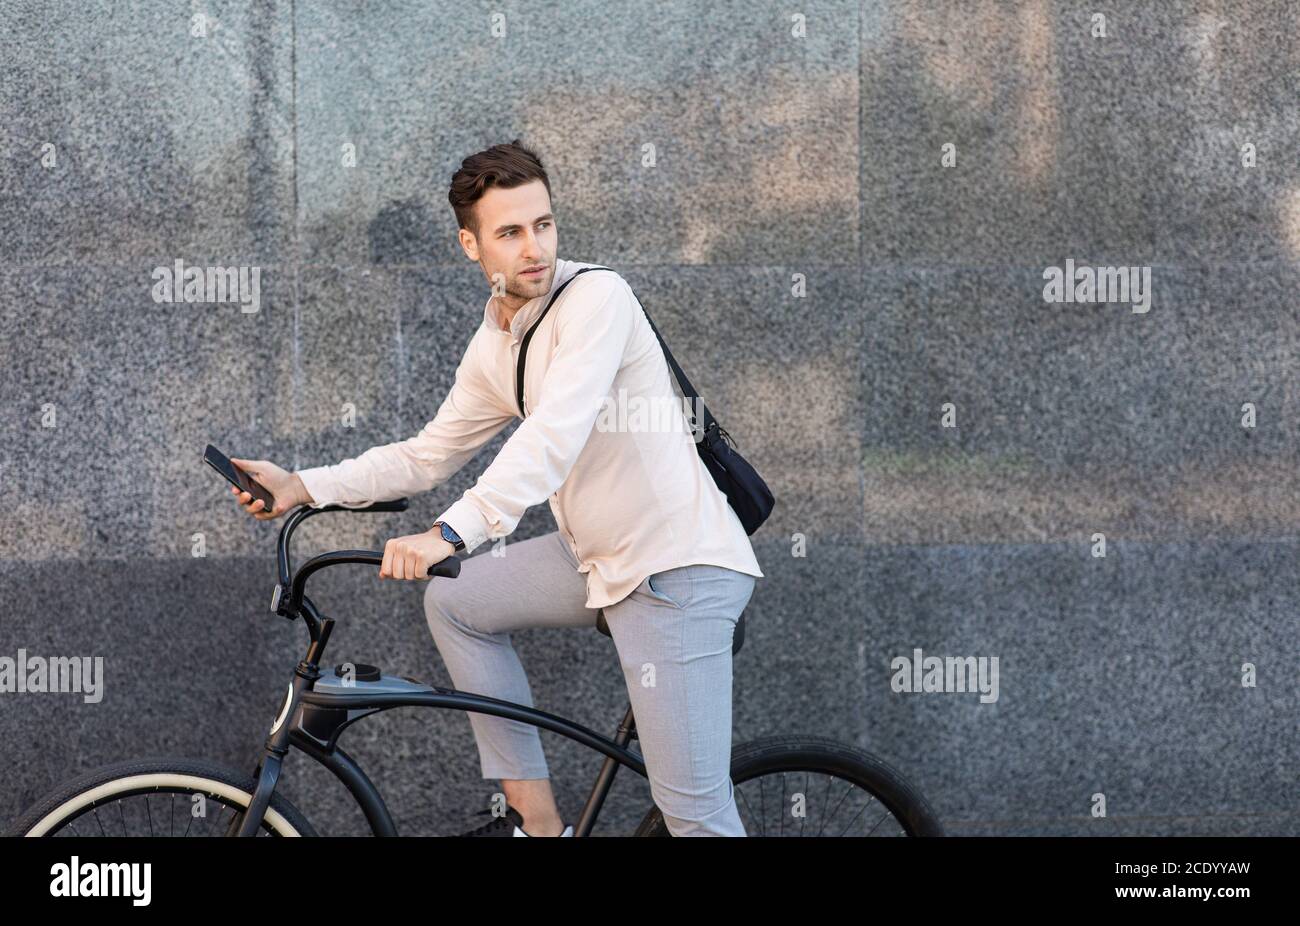 Ecologic transport concept. Serious man with bag rides on bicycle and looks away Stock Photo